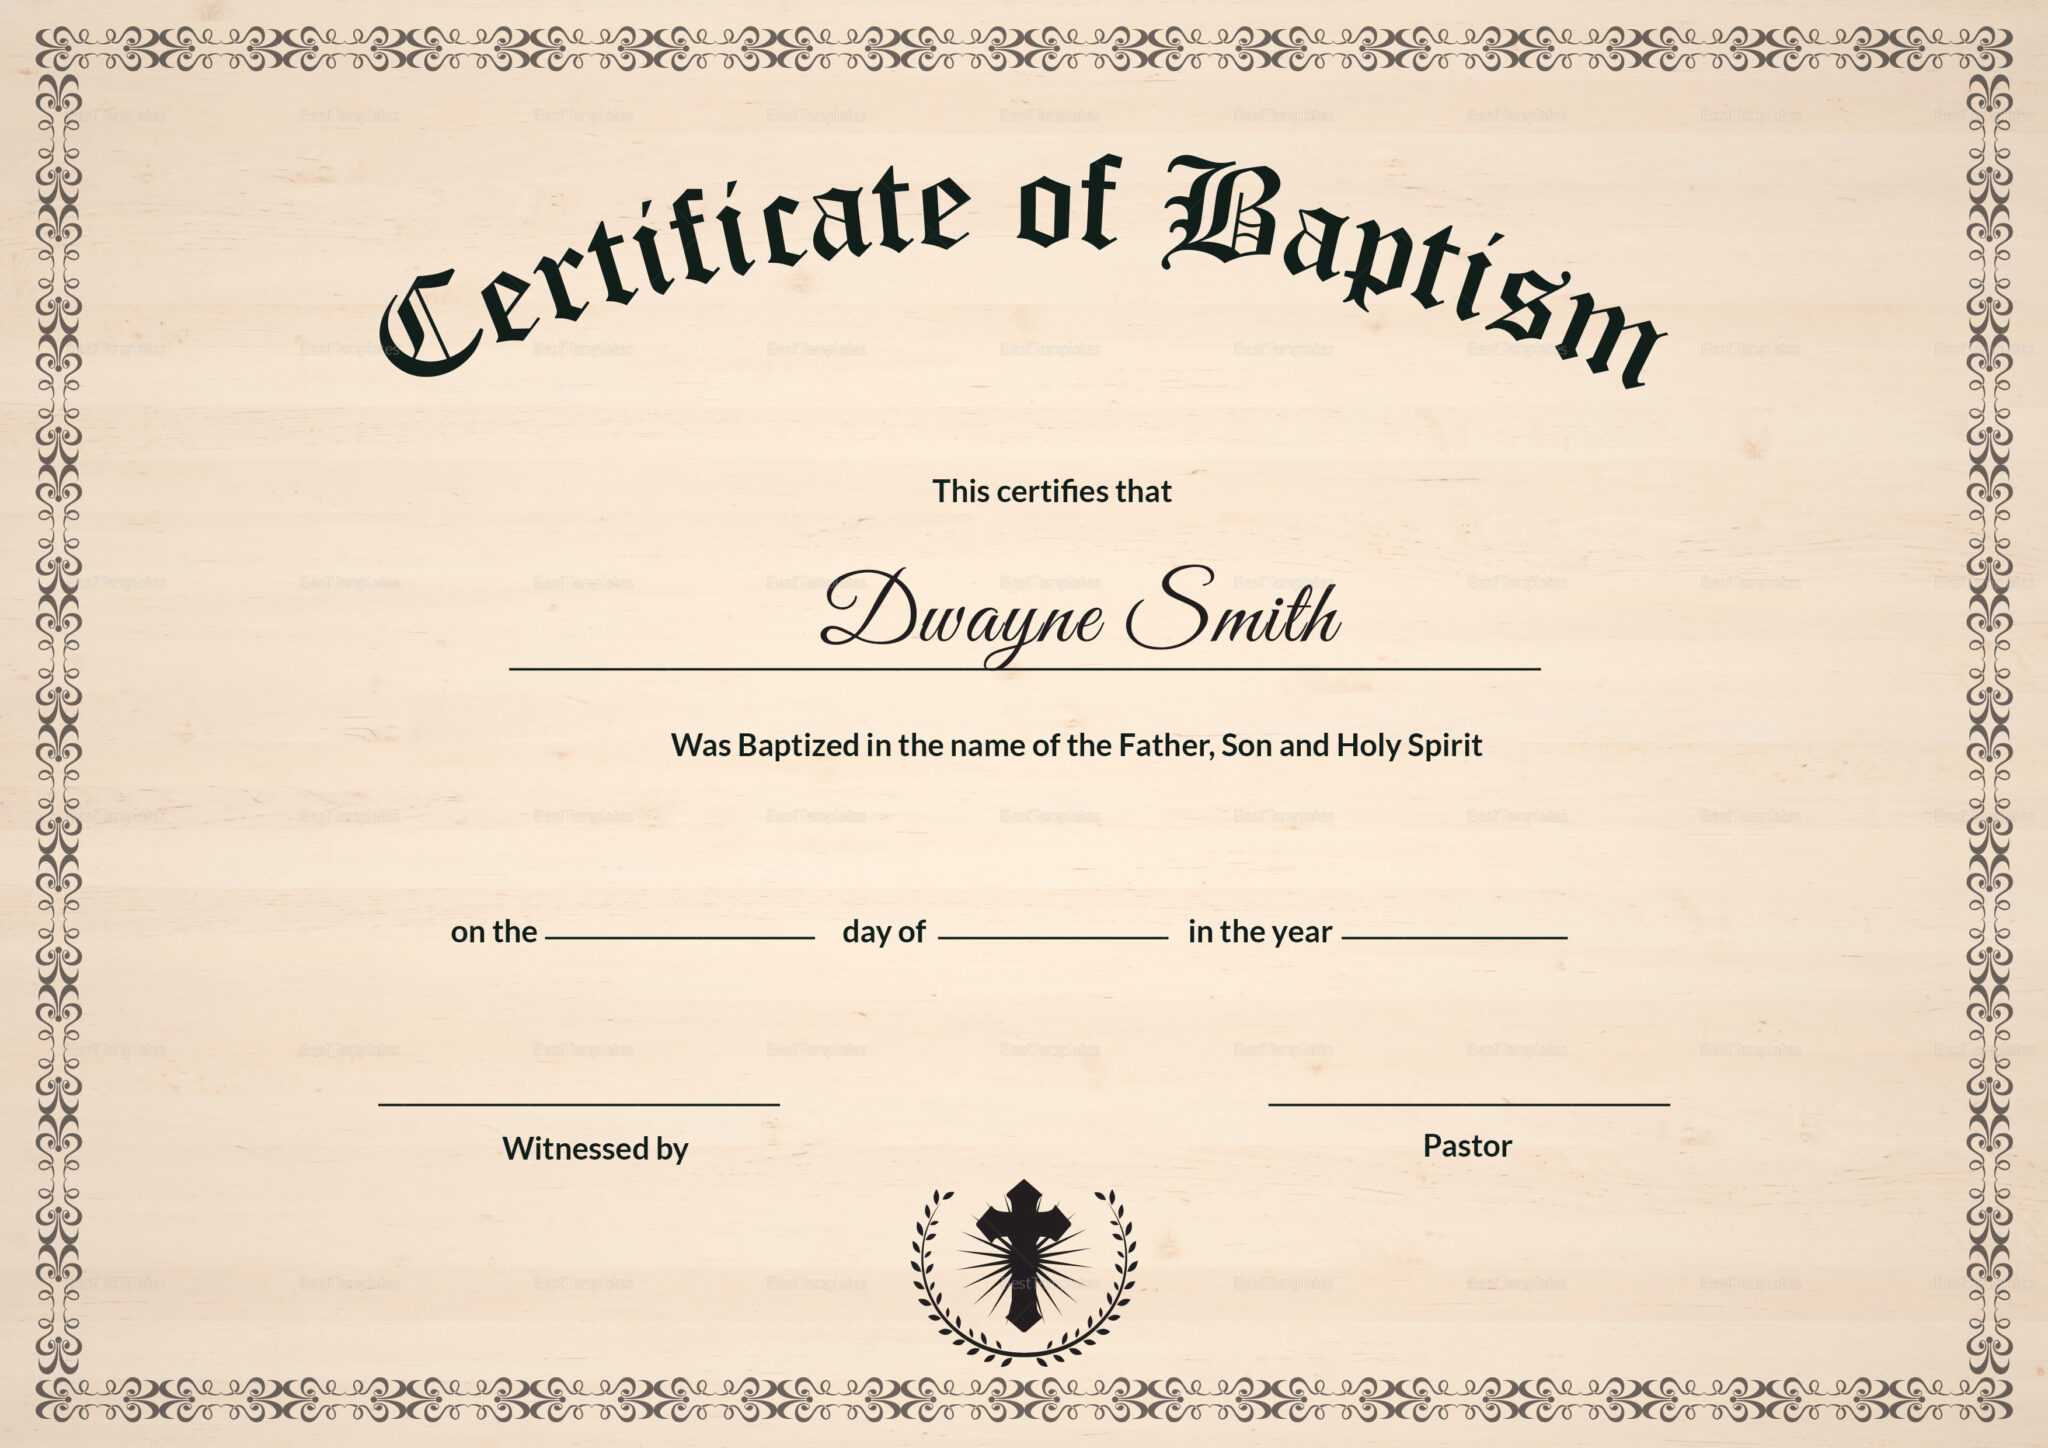 baptism-certificate-template-word